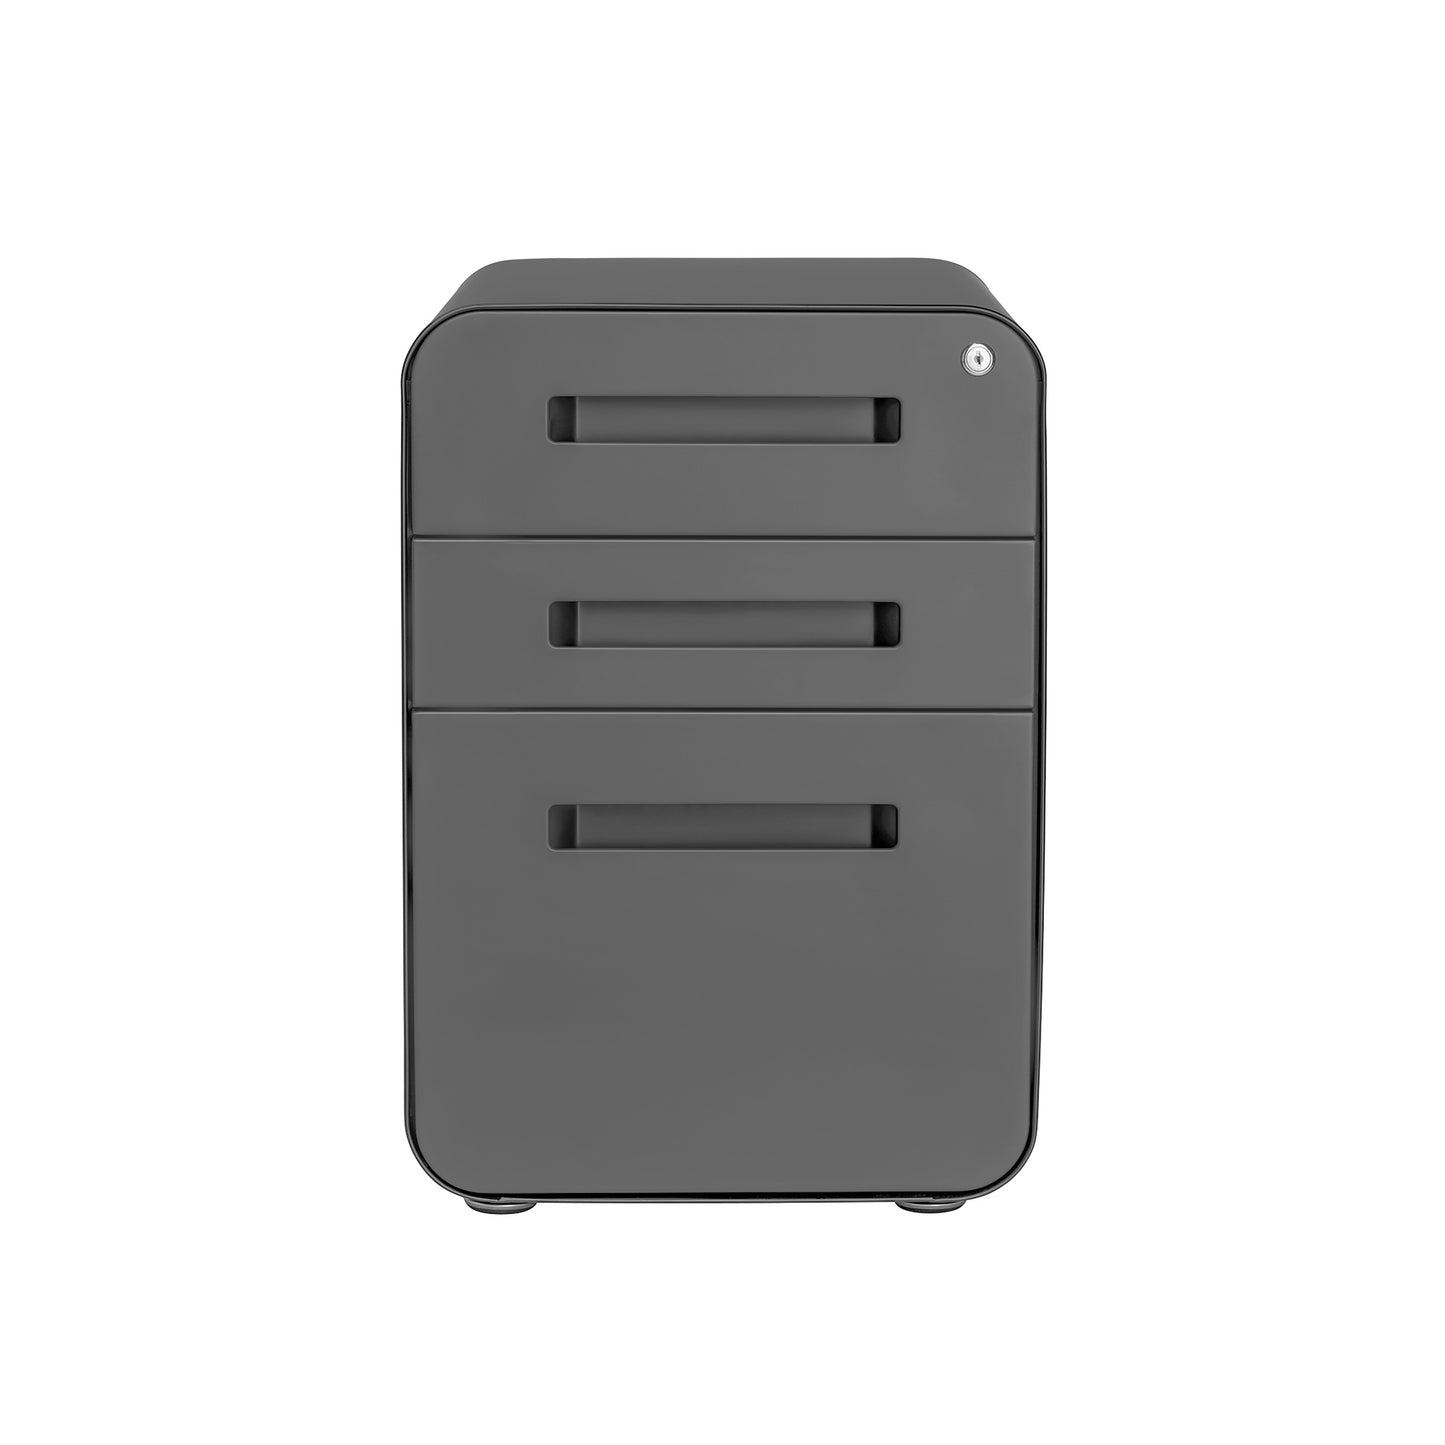 SHIPS MARCH 15TH - Stockpile Curve File Cabinet (Dark Grey)